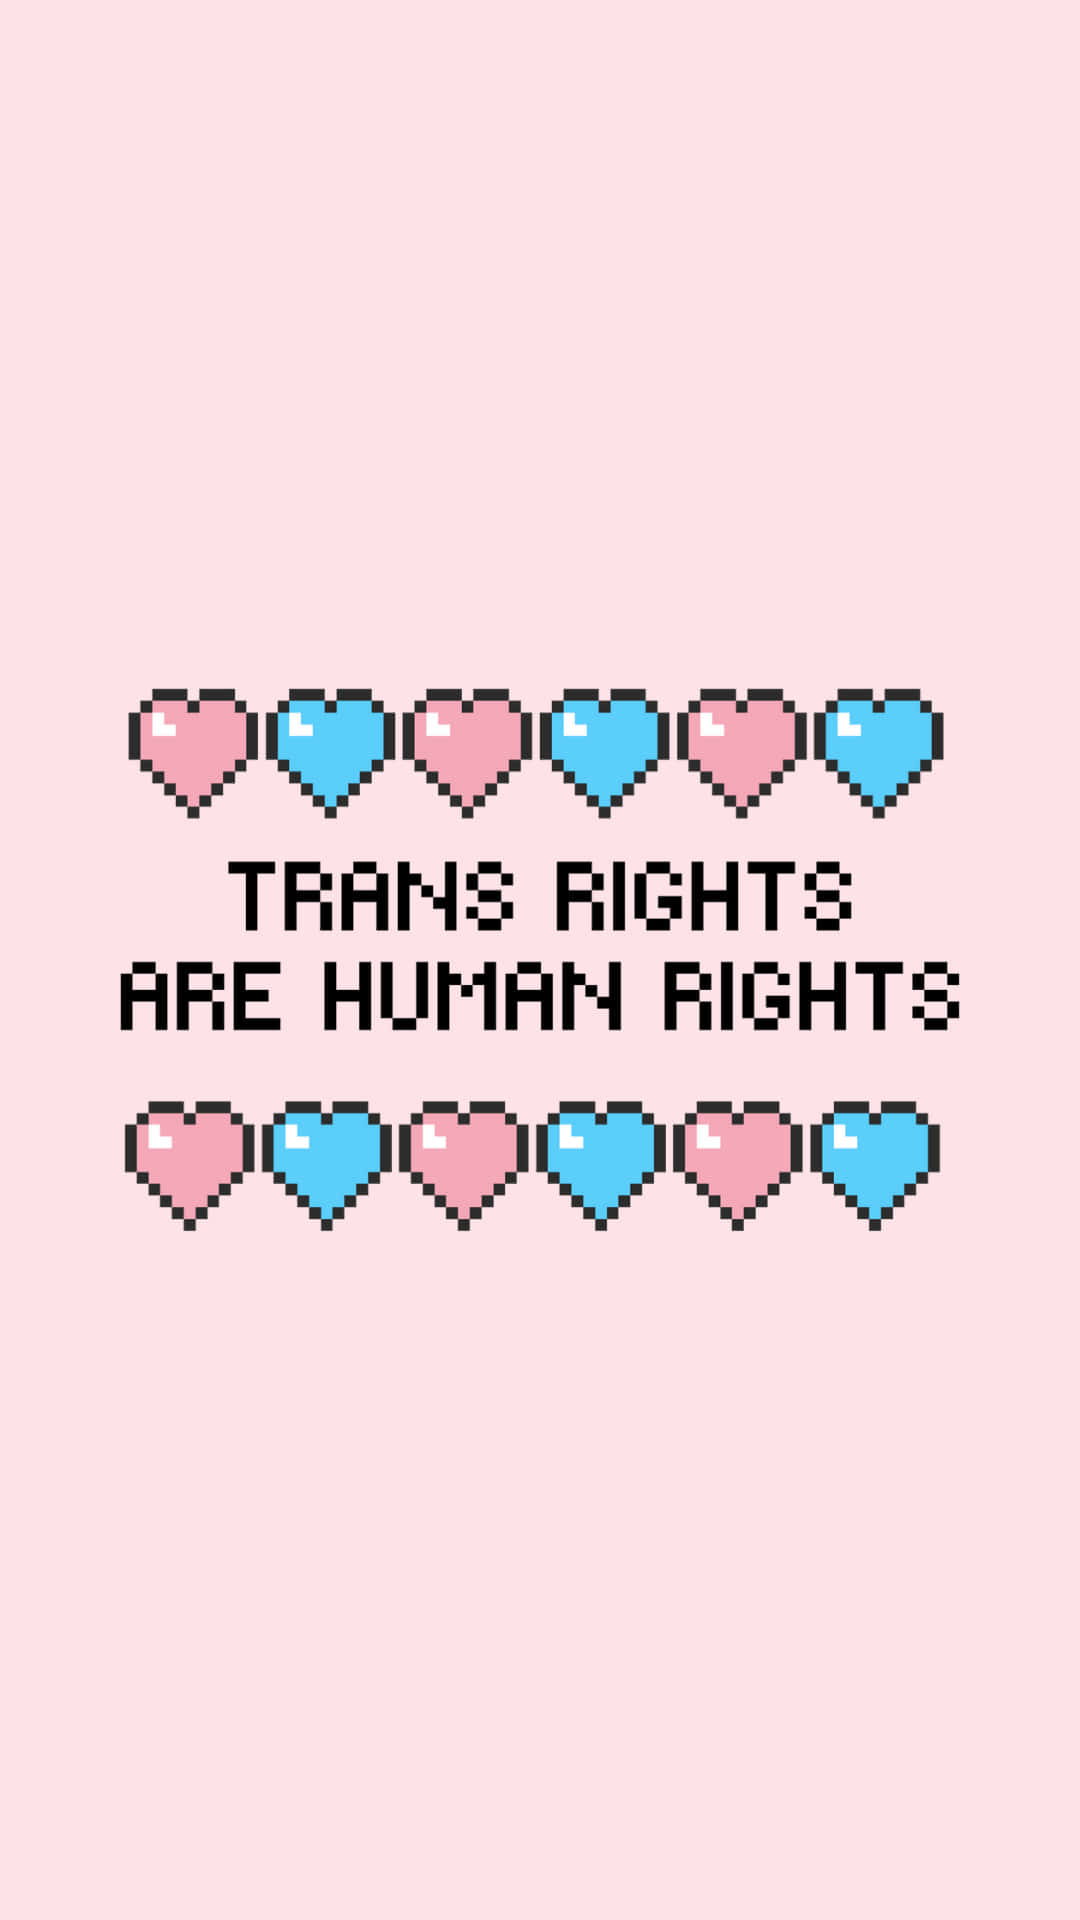 Trans Rights Are Human Rights - Pixel Art Wallpaper